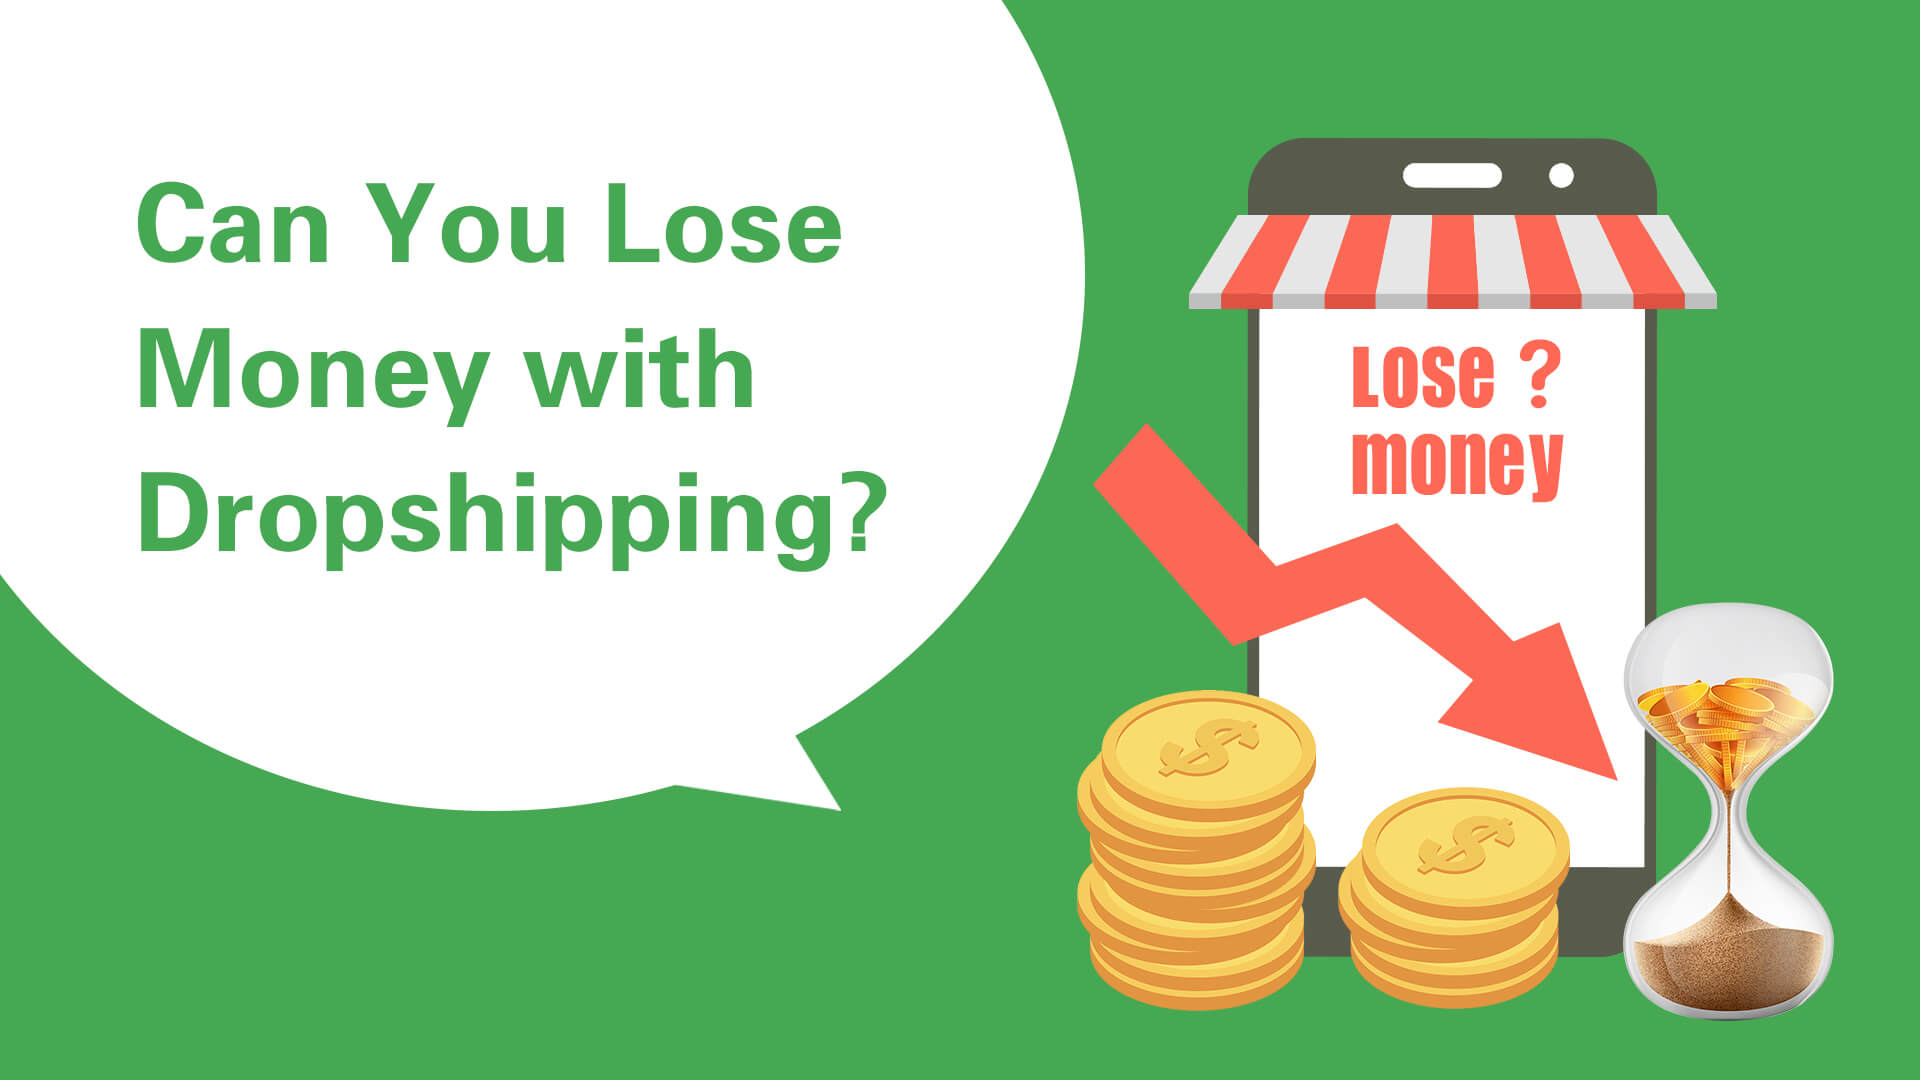 https://bestfulfill.com/wp-content/uploads/2022/03/can-you-lose-money-with-dropshipping.jpg